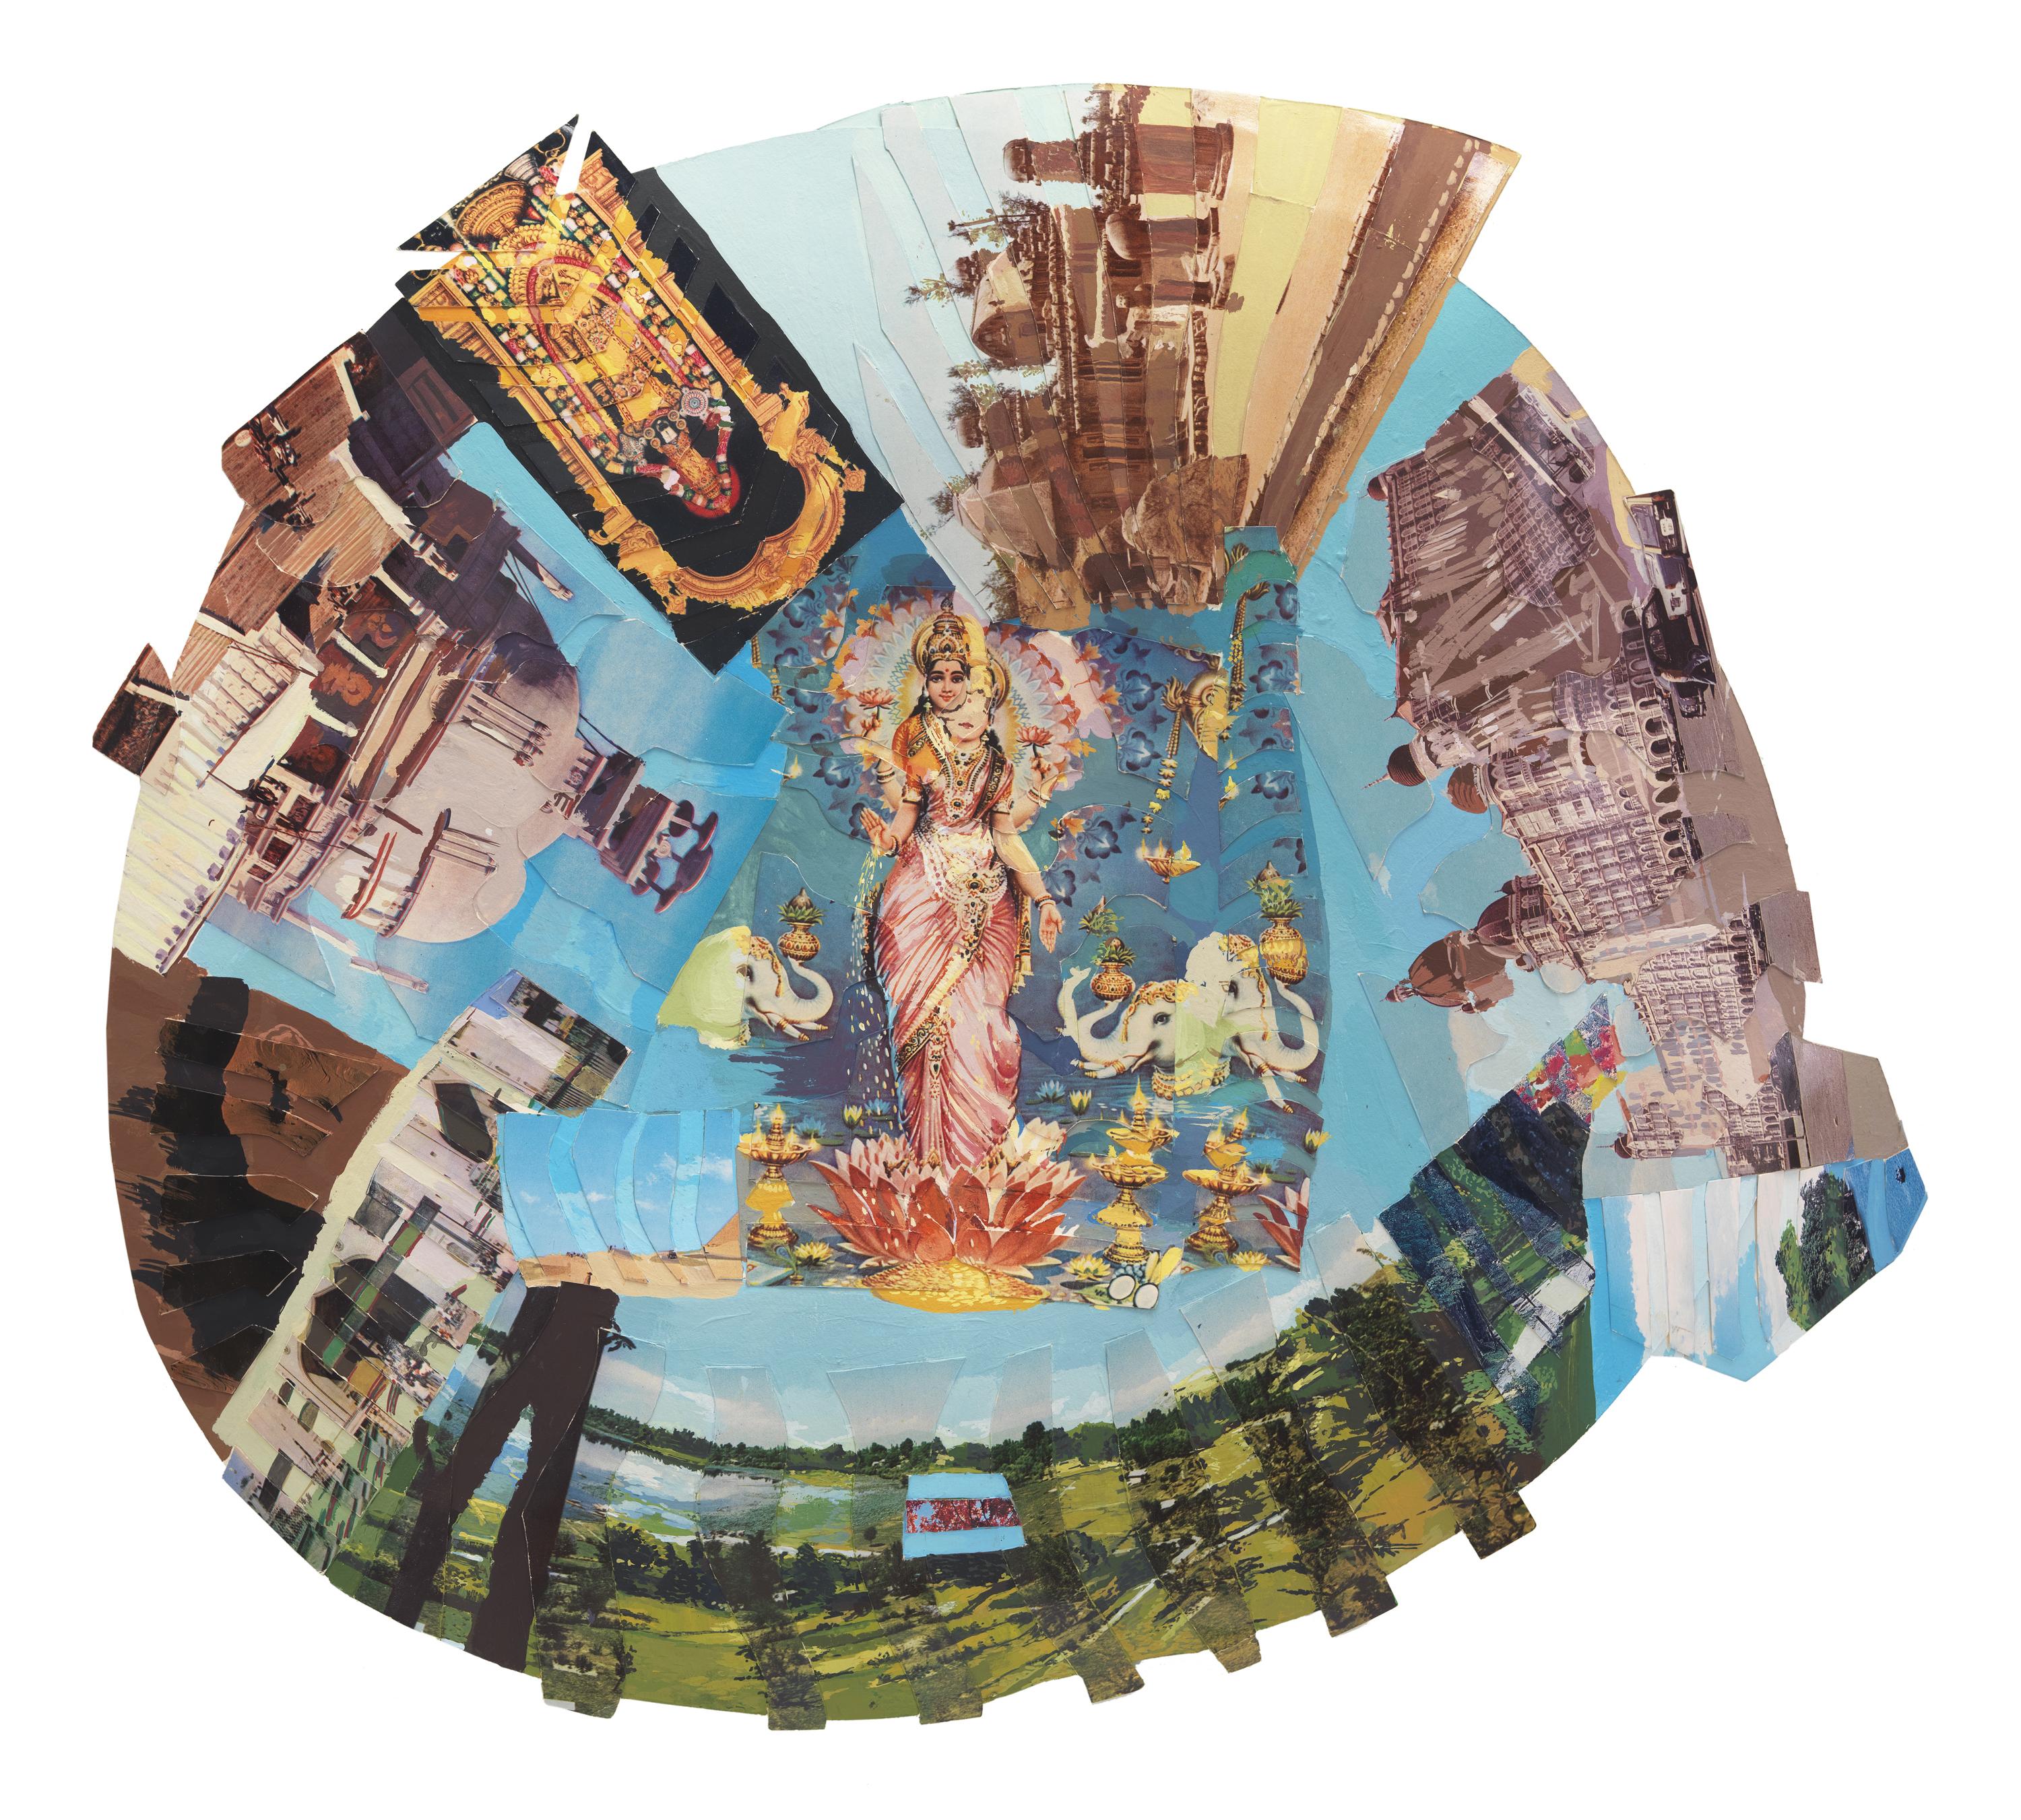 A vaguely circular collage features an ornately dressed woman against a sky blue background at its center, surrounded by images of various buildings and landscapes.